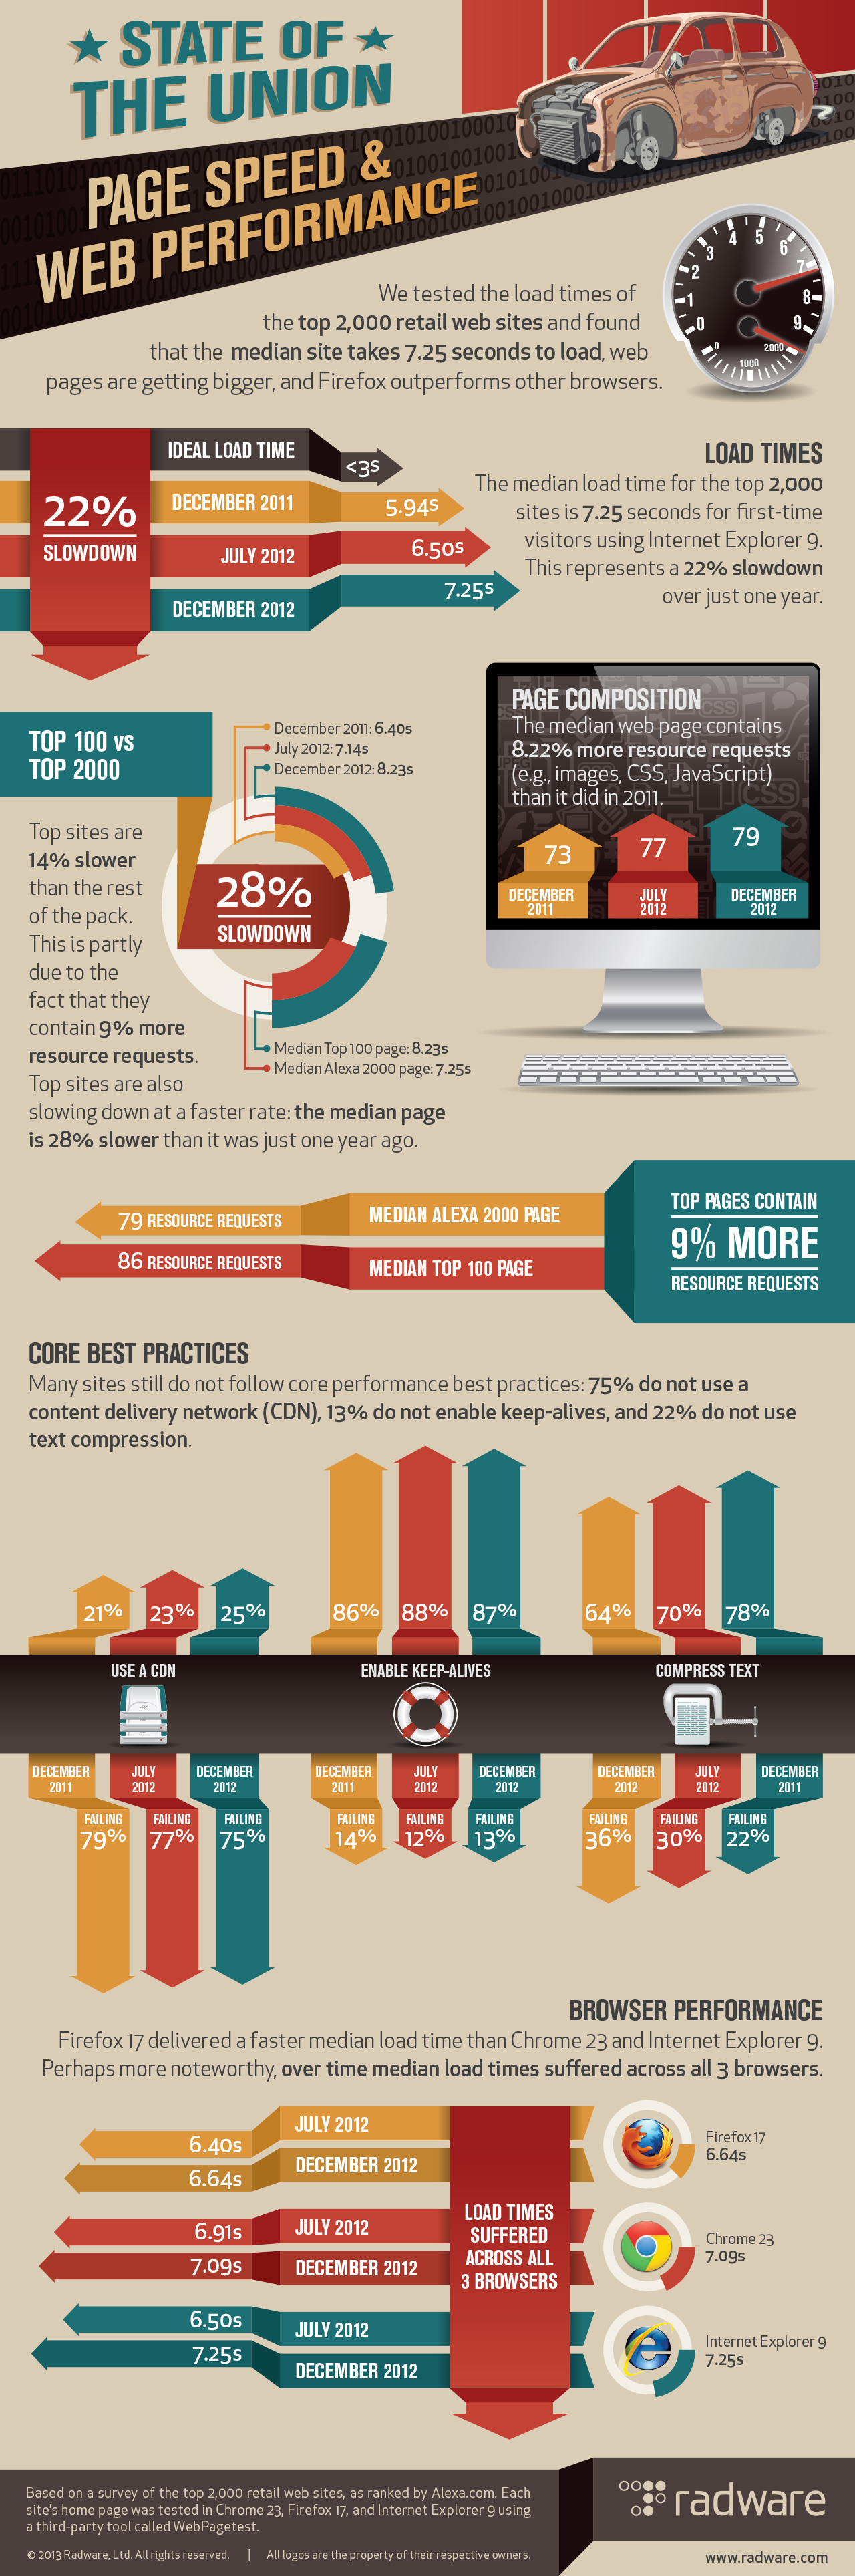 2013 Spring State of the Union: Ecommerce Page Speed & Web Performance Infographic